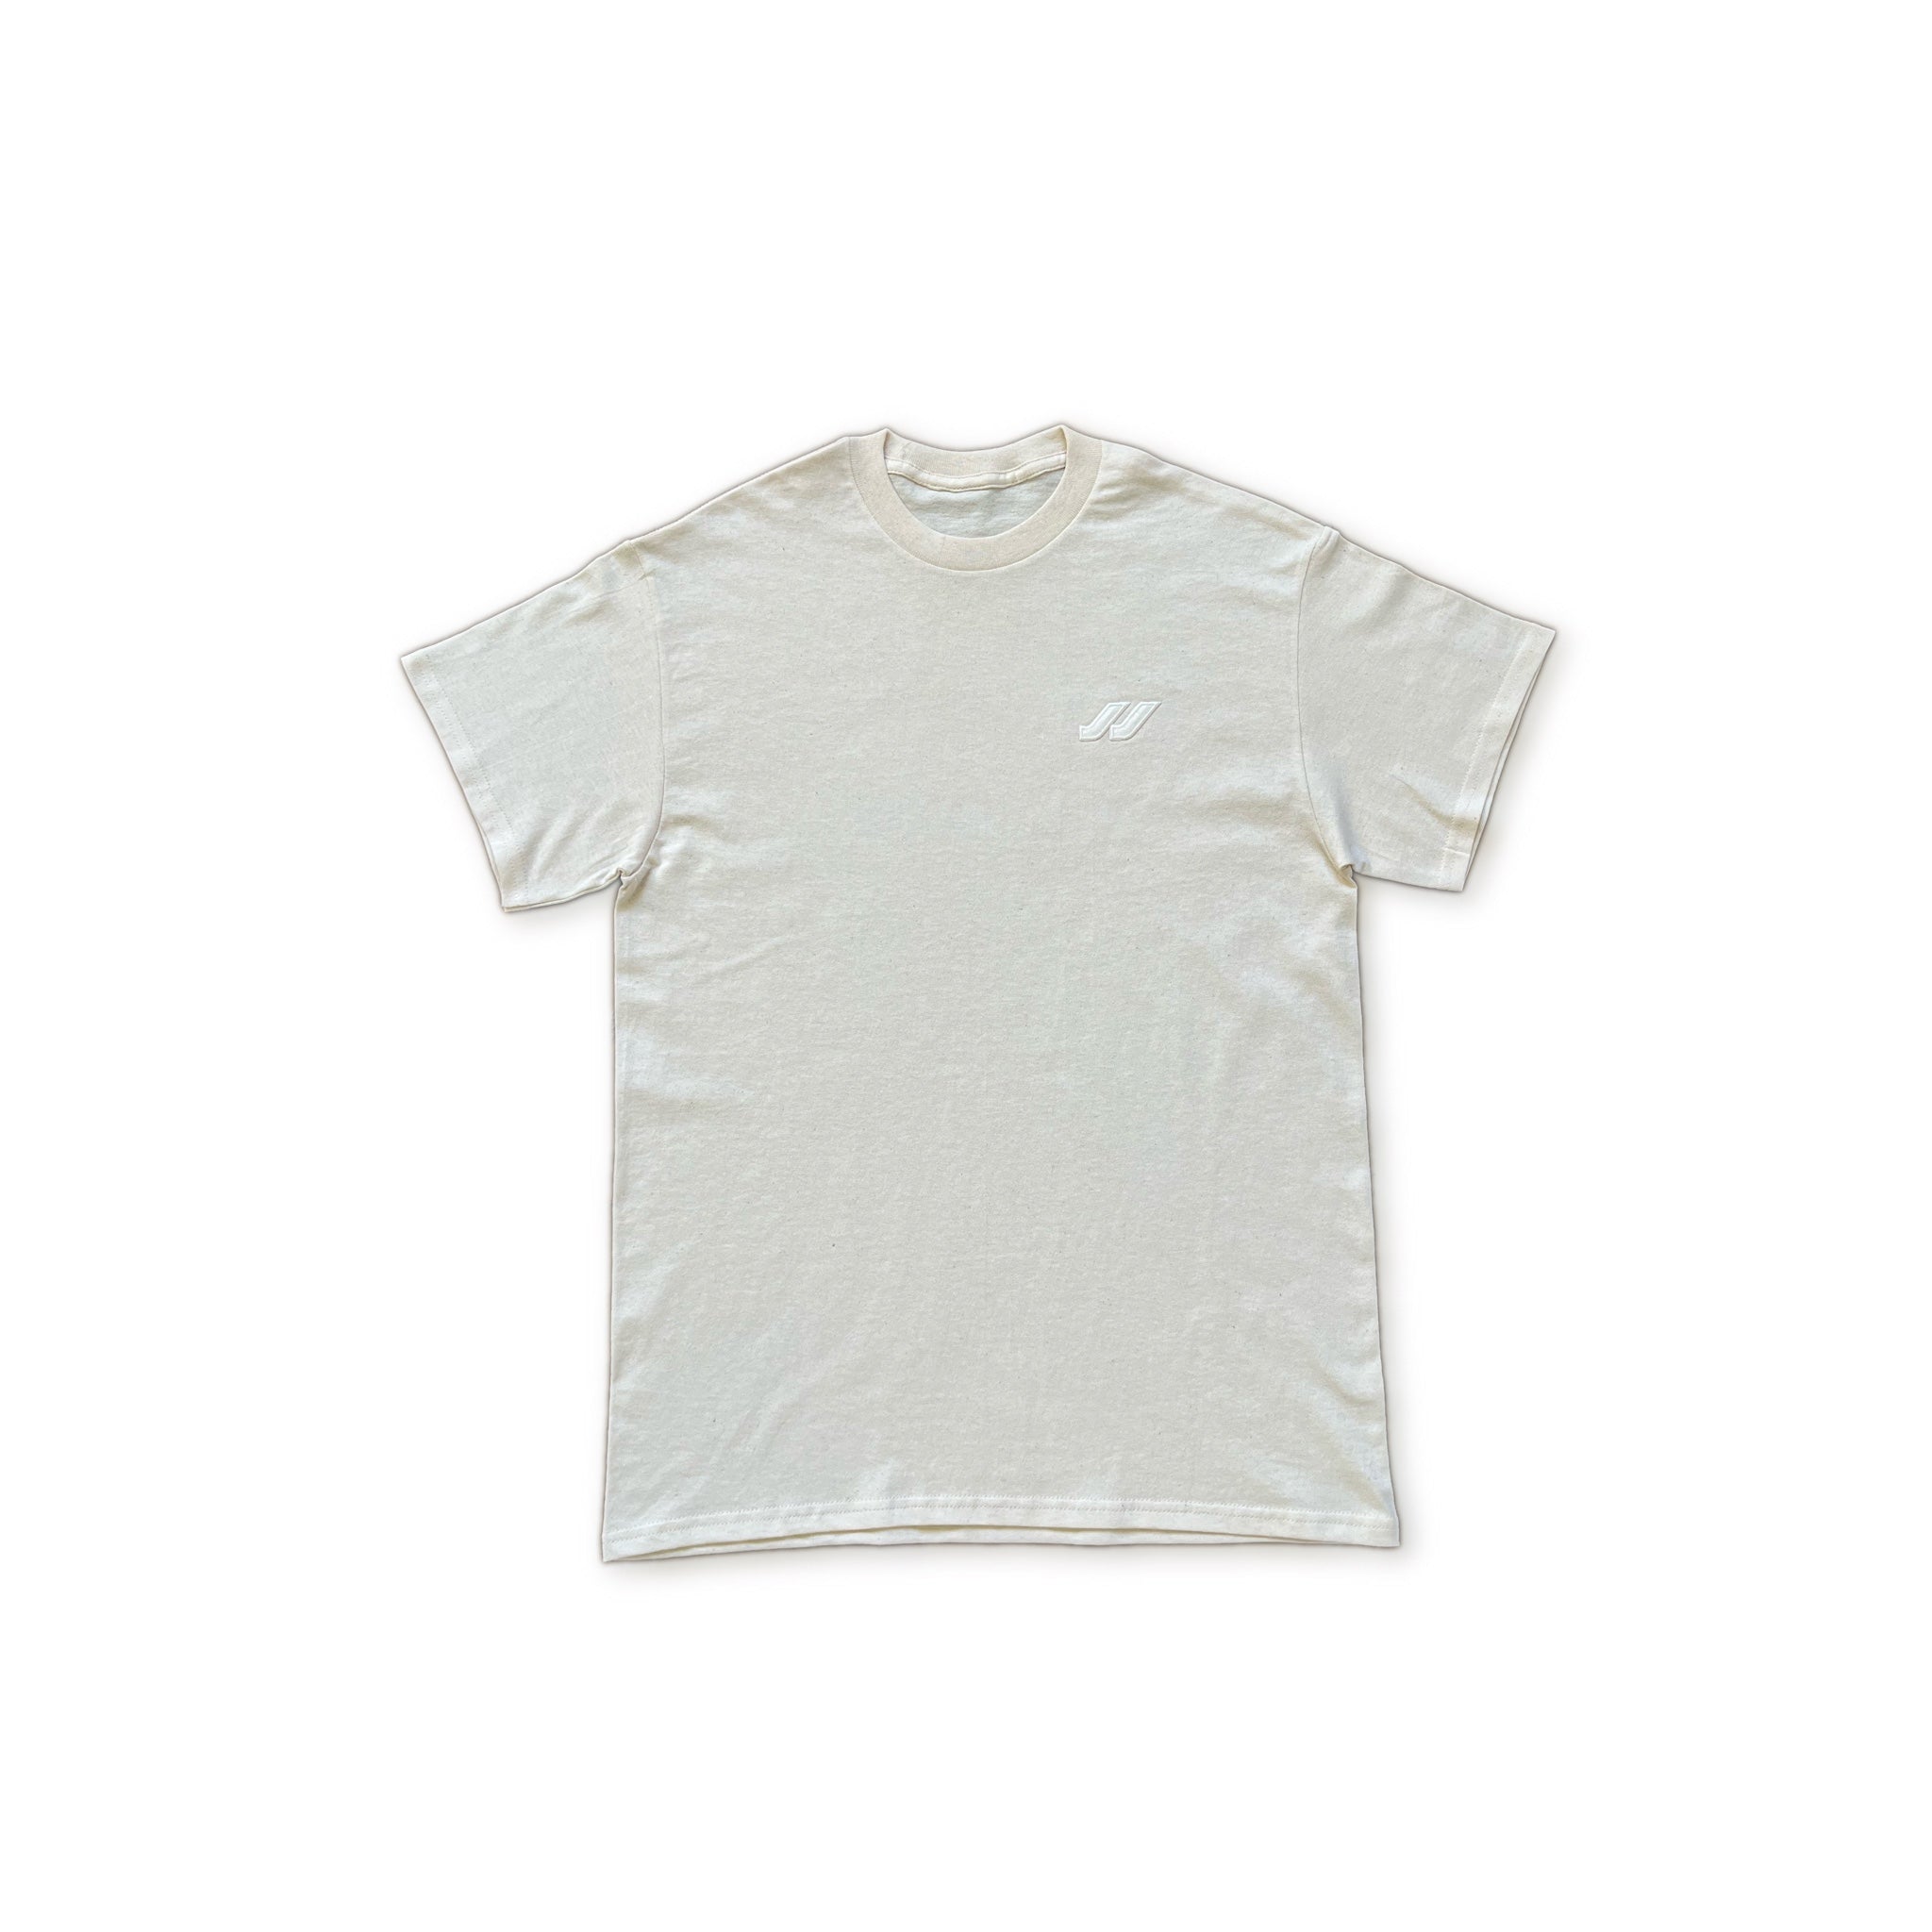 THE URANIA PATCH TEE FOR KIDS